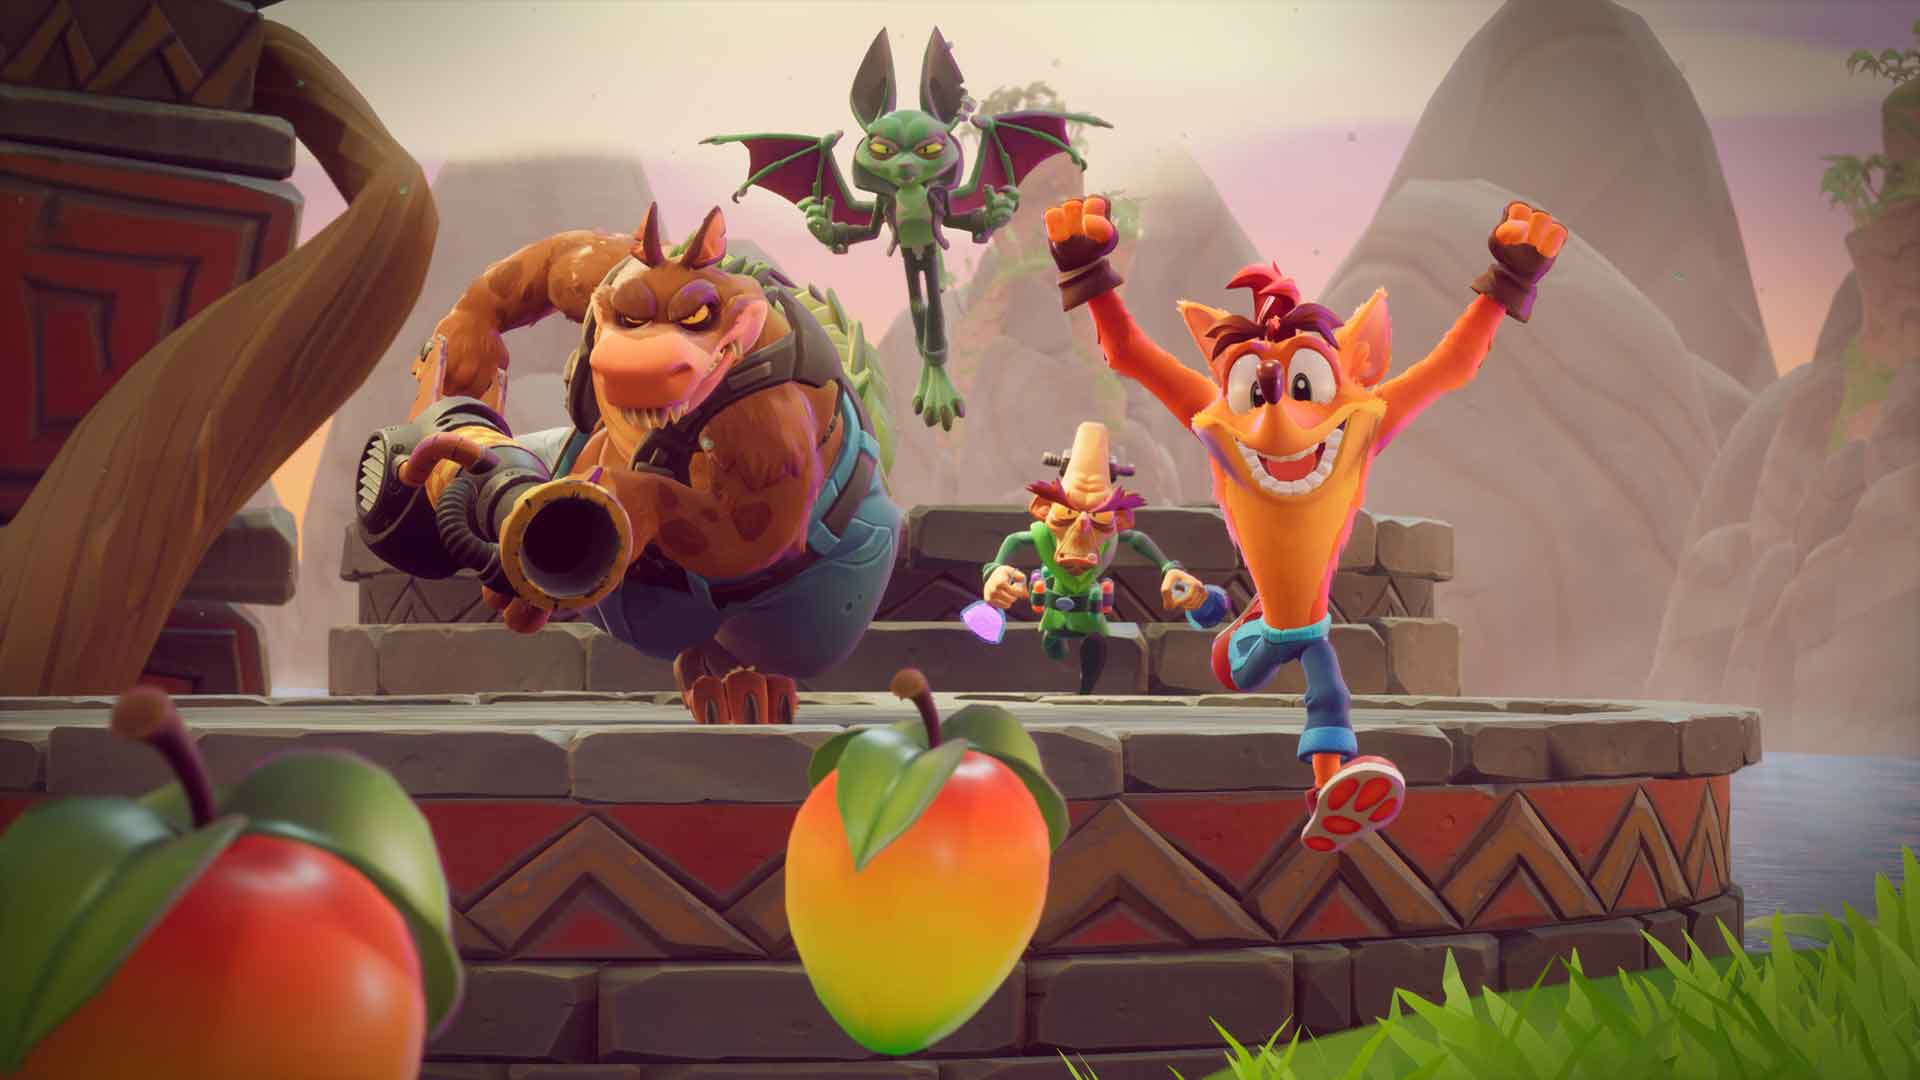 A New 'Crash Bandicoot' Game Is Coming to Xbox and PlayStation This October